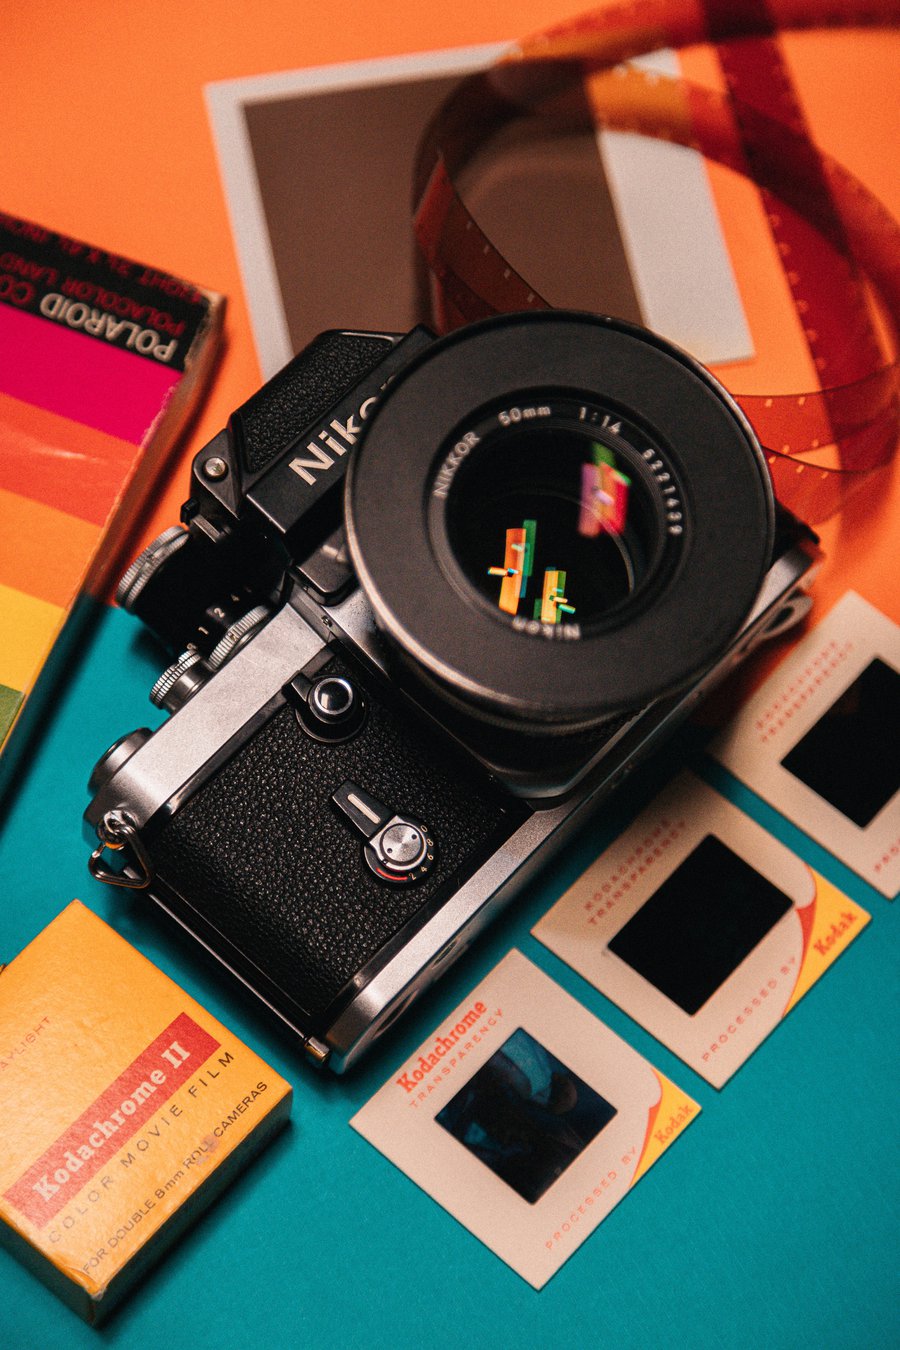 Go Retro for Teens: Intro to Film Photography Summer Camp image